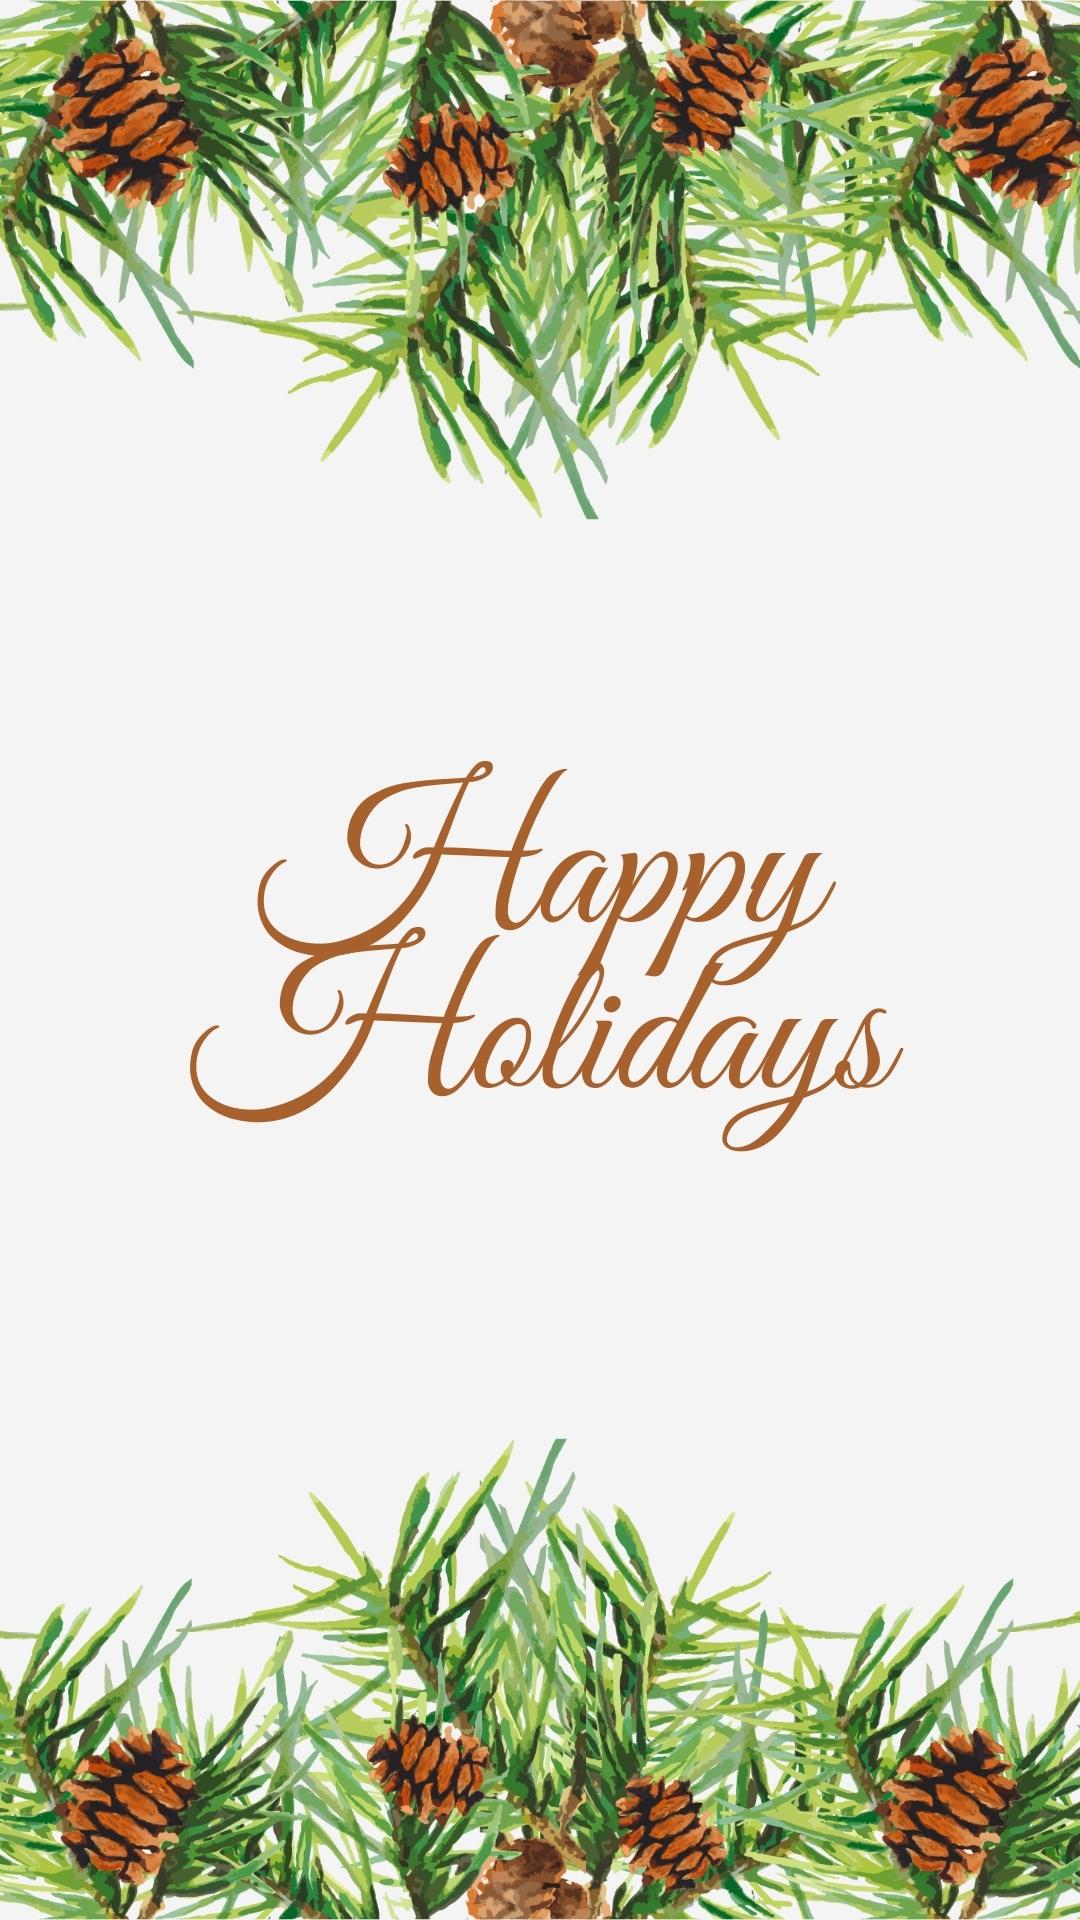 Rustic Christmas phone wallpaper background using pinecones, pine boughs and the words Happy Holidays on an off-white background.